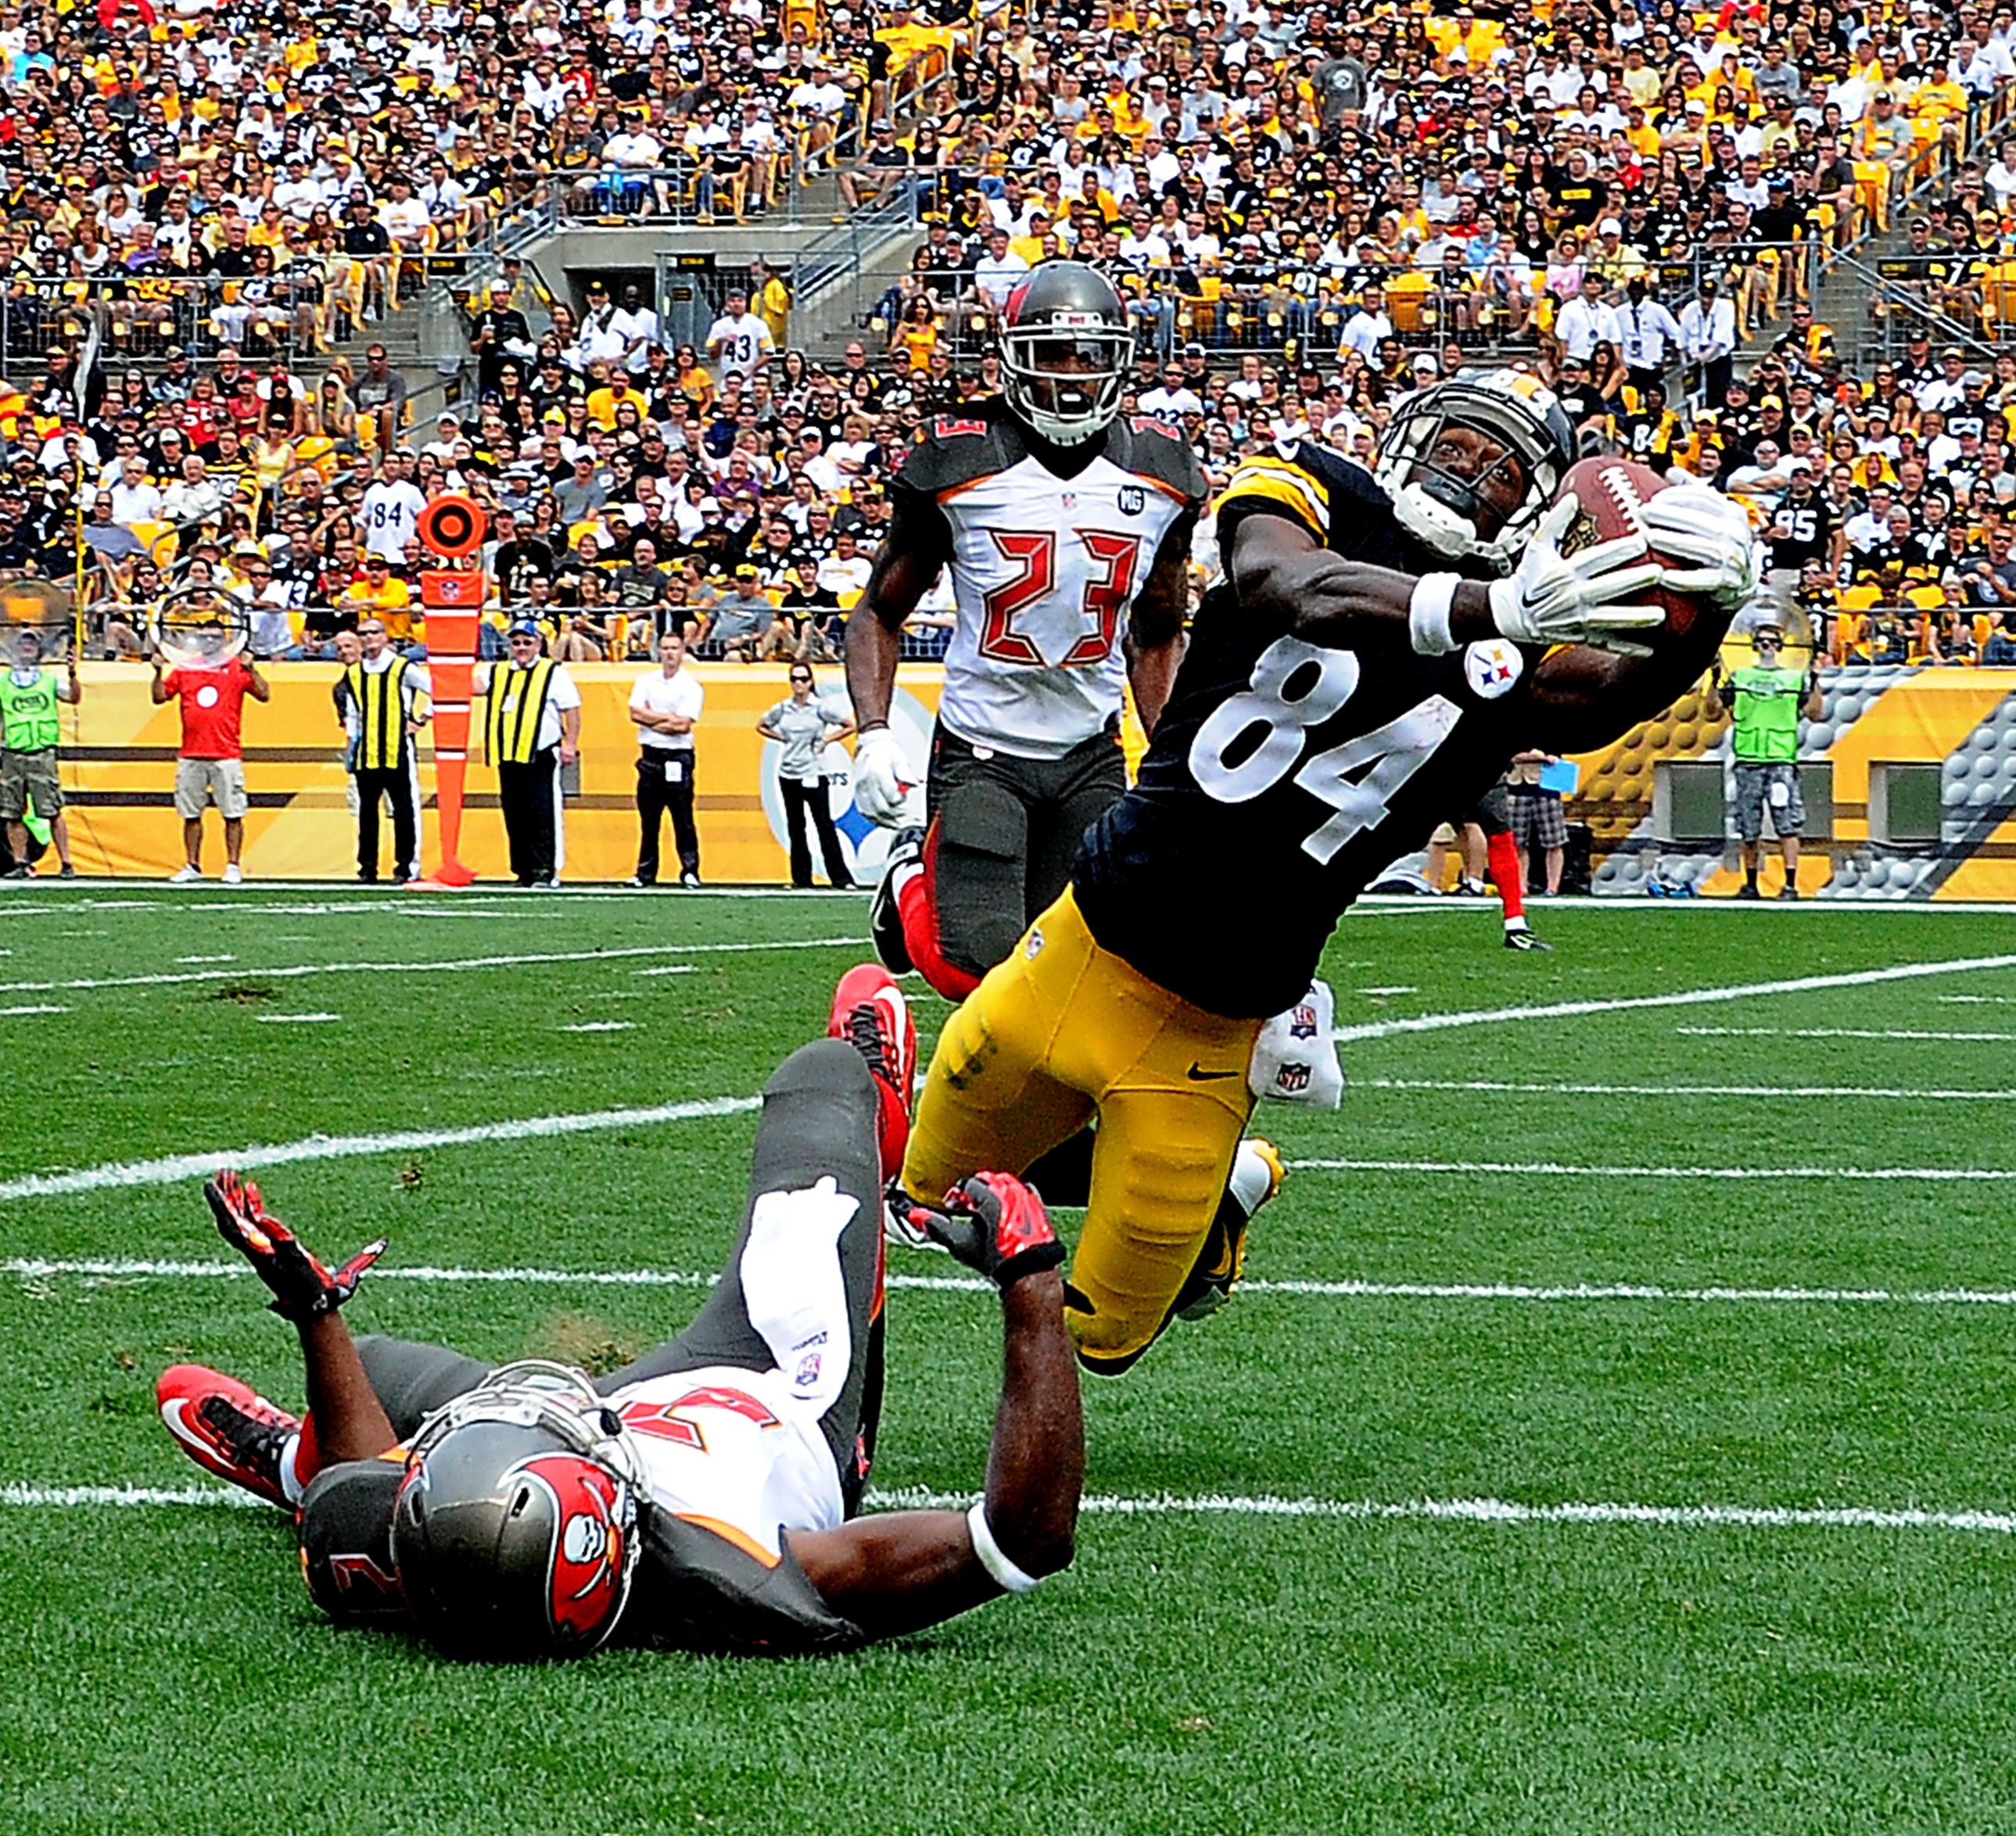 On the Steelers: Finding another capable wide receiver | Pittsburgh Post-Gazette